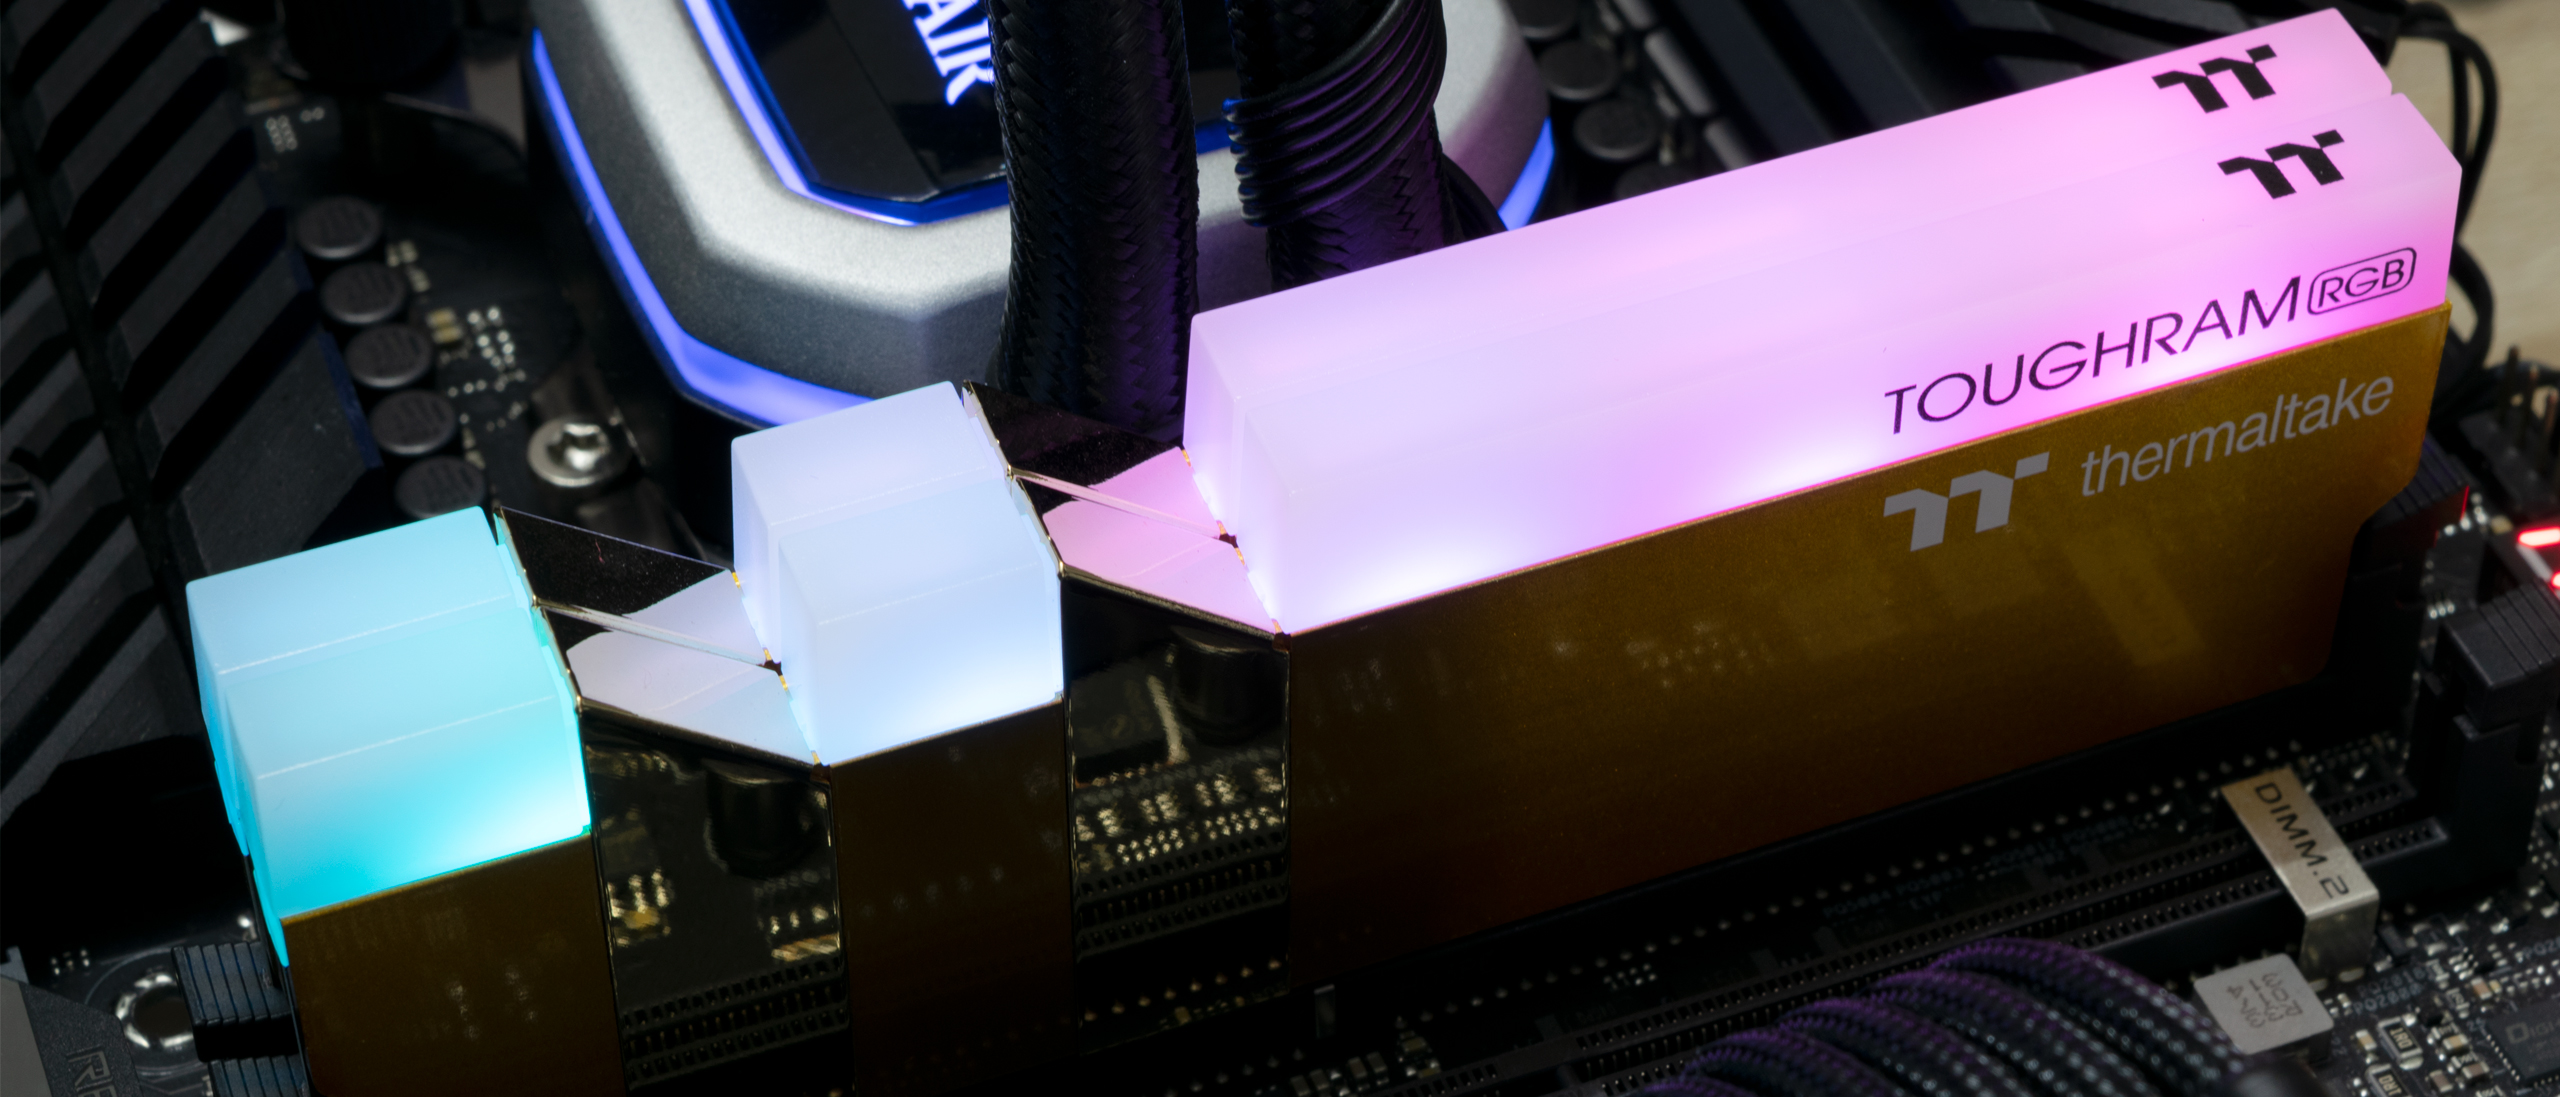 | Gold The Tom\'s Review: Test Hardware DDR4-3600 Of RGB ToughRAM Fire Metallic Thermaltake Failing